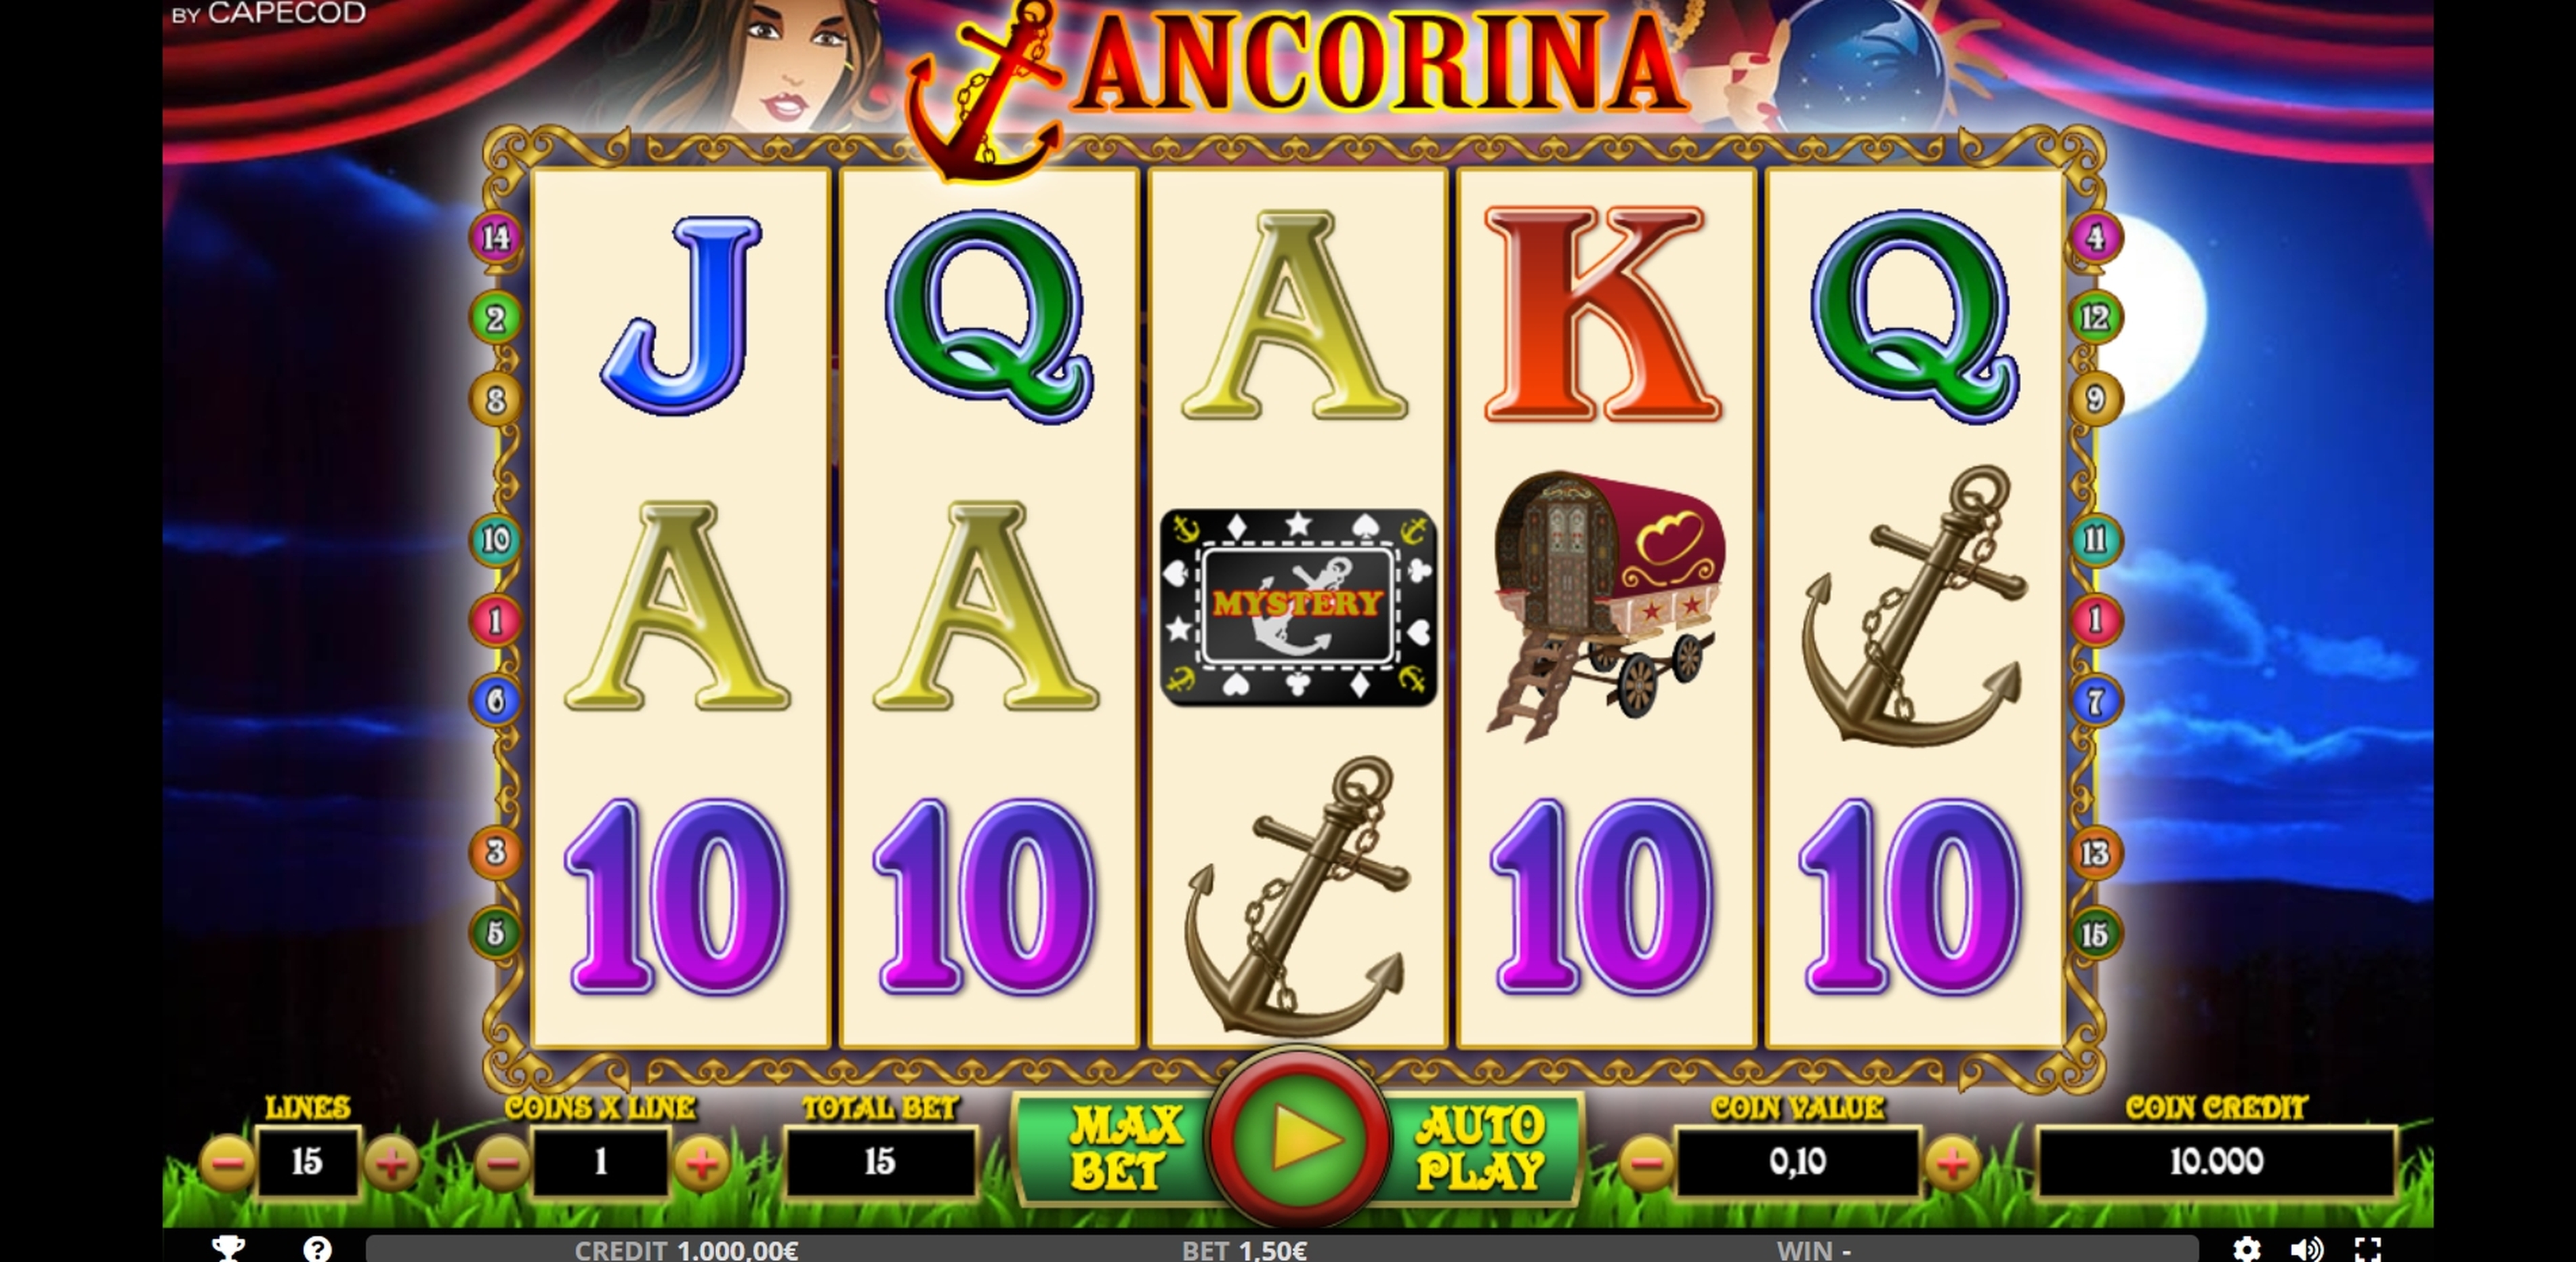 Reels in ANCORINA Slot Game by Capecod Gaming